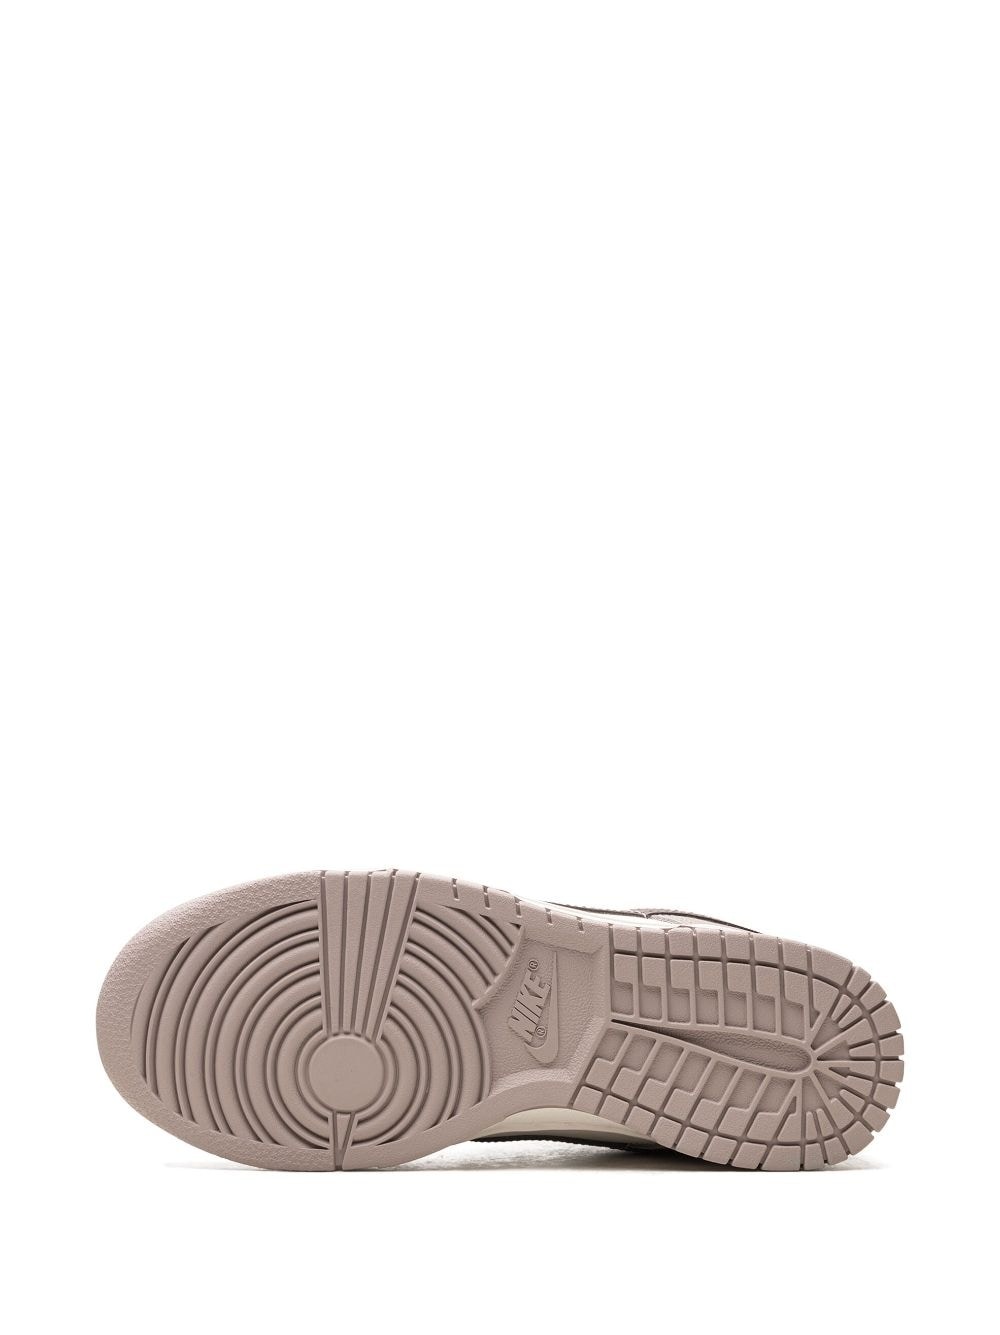 Dunk Low "Diffused Taupe" sneakers - 4